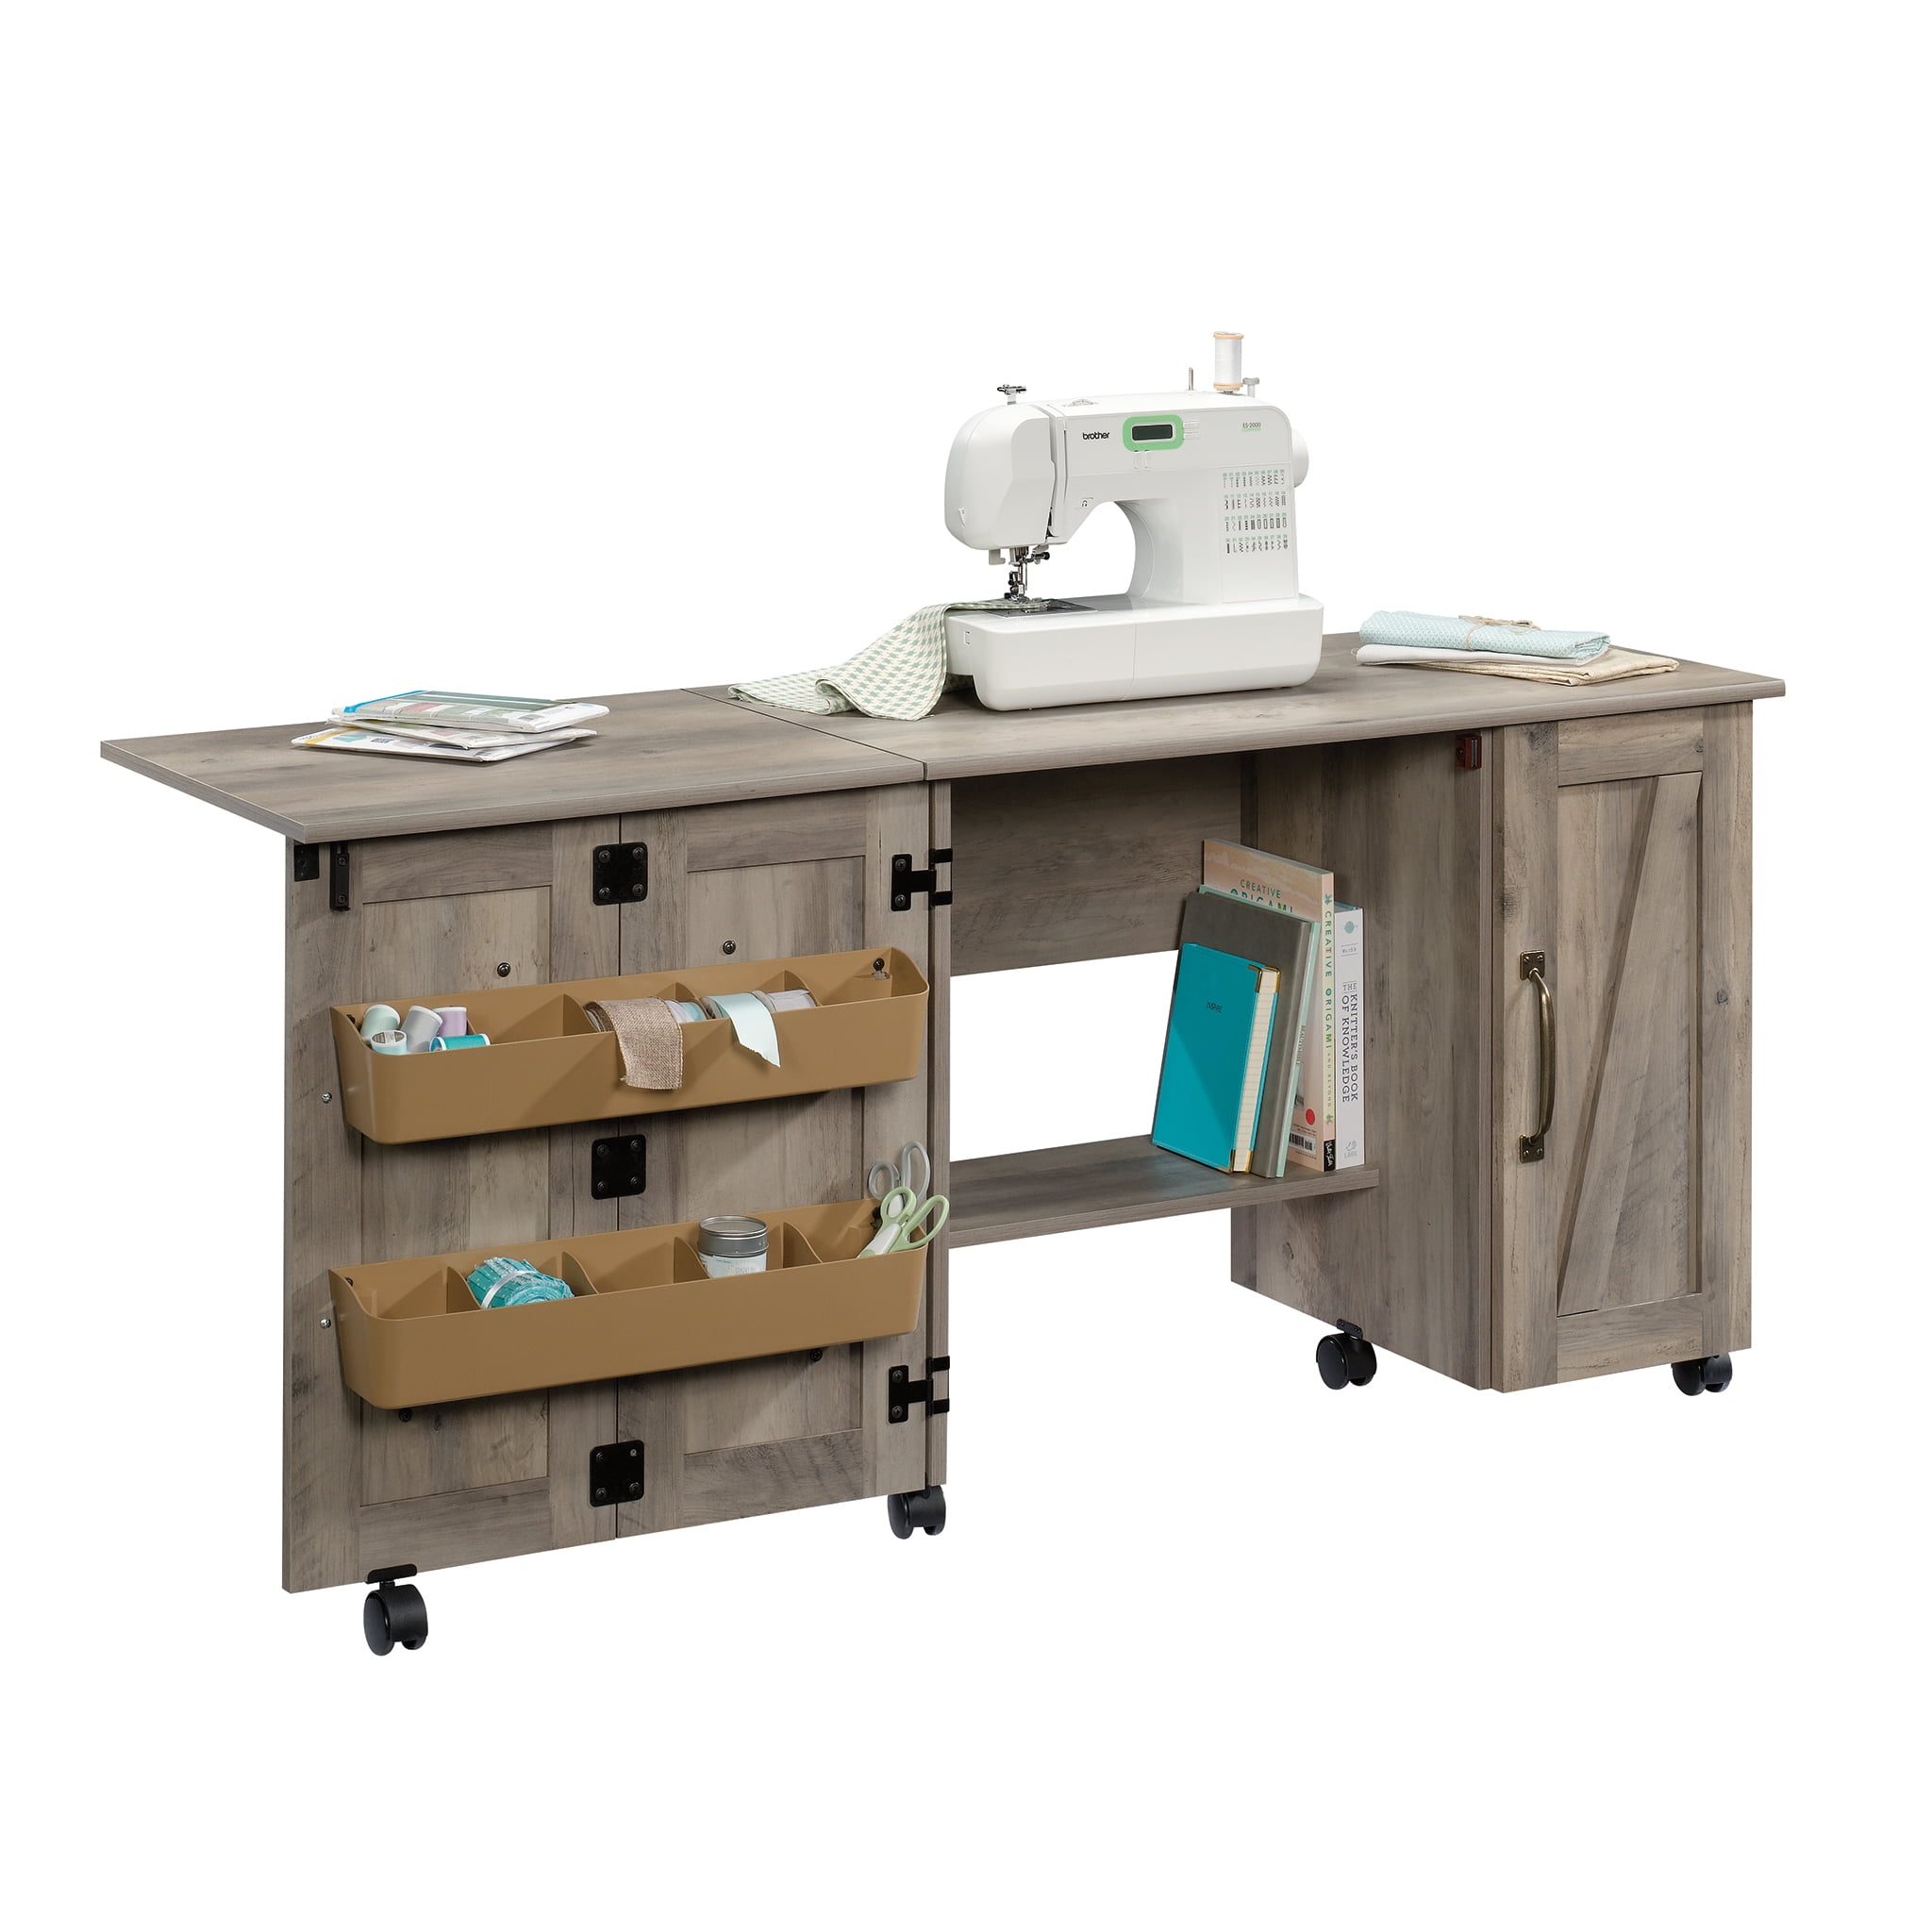 Rustic Gray Better Homes & Gardens Easy-roll casters Modern Farmhouse Wood Sewing Table with Sewing Kit and Storage Case 